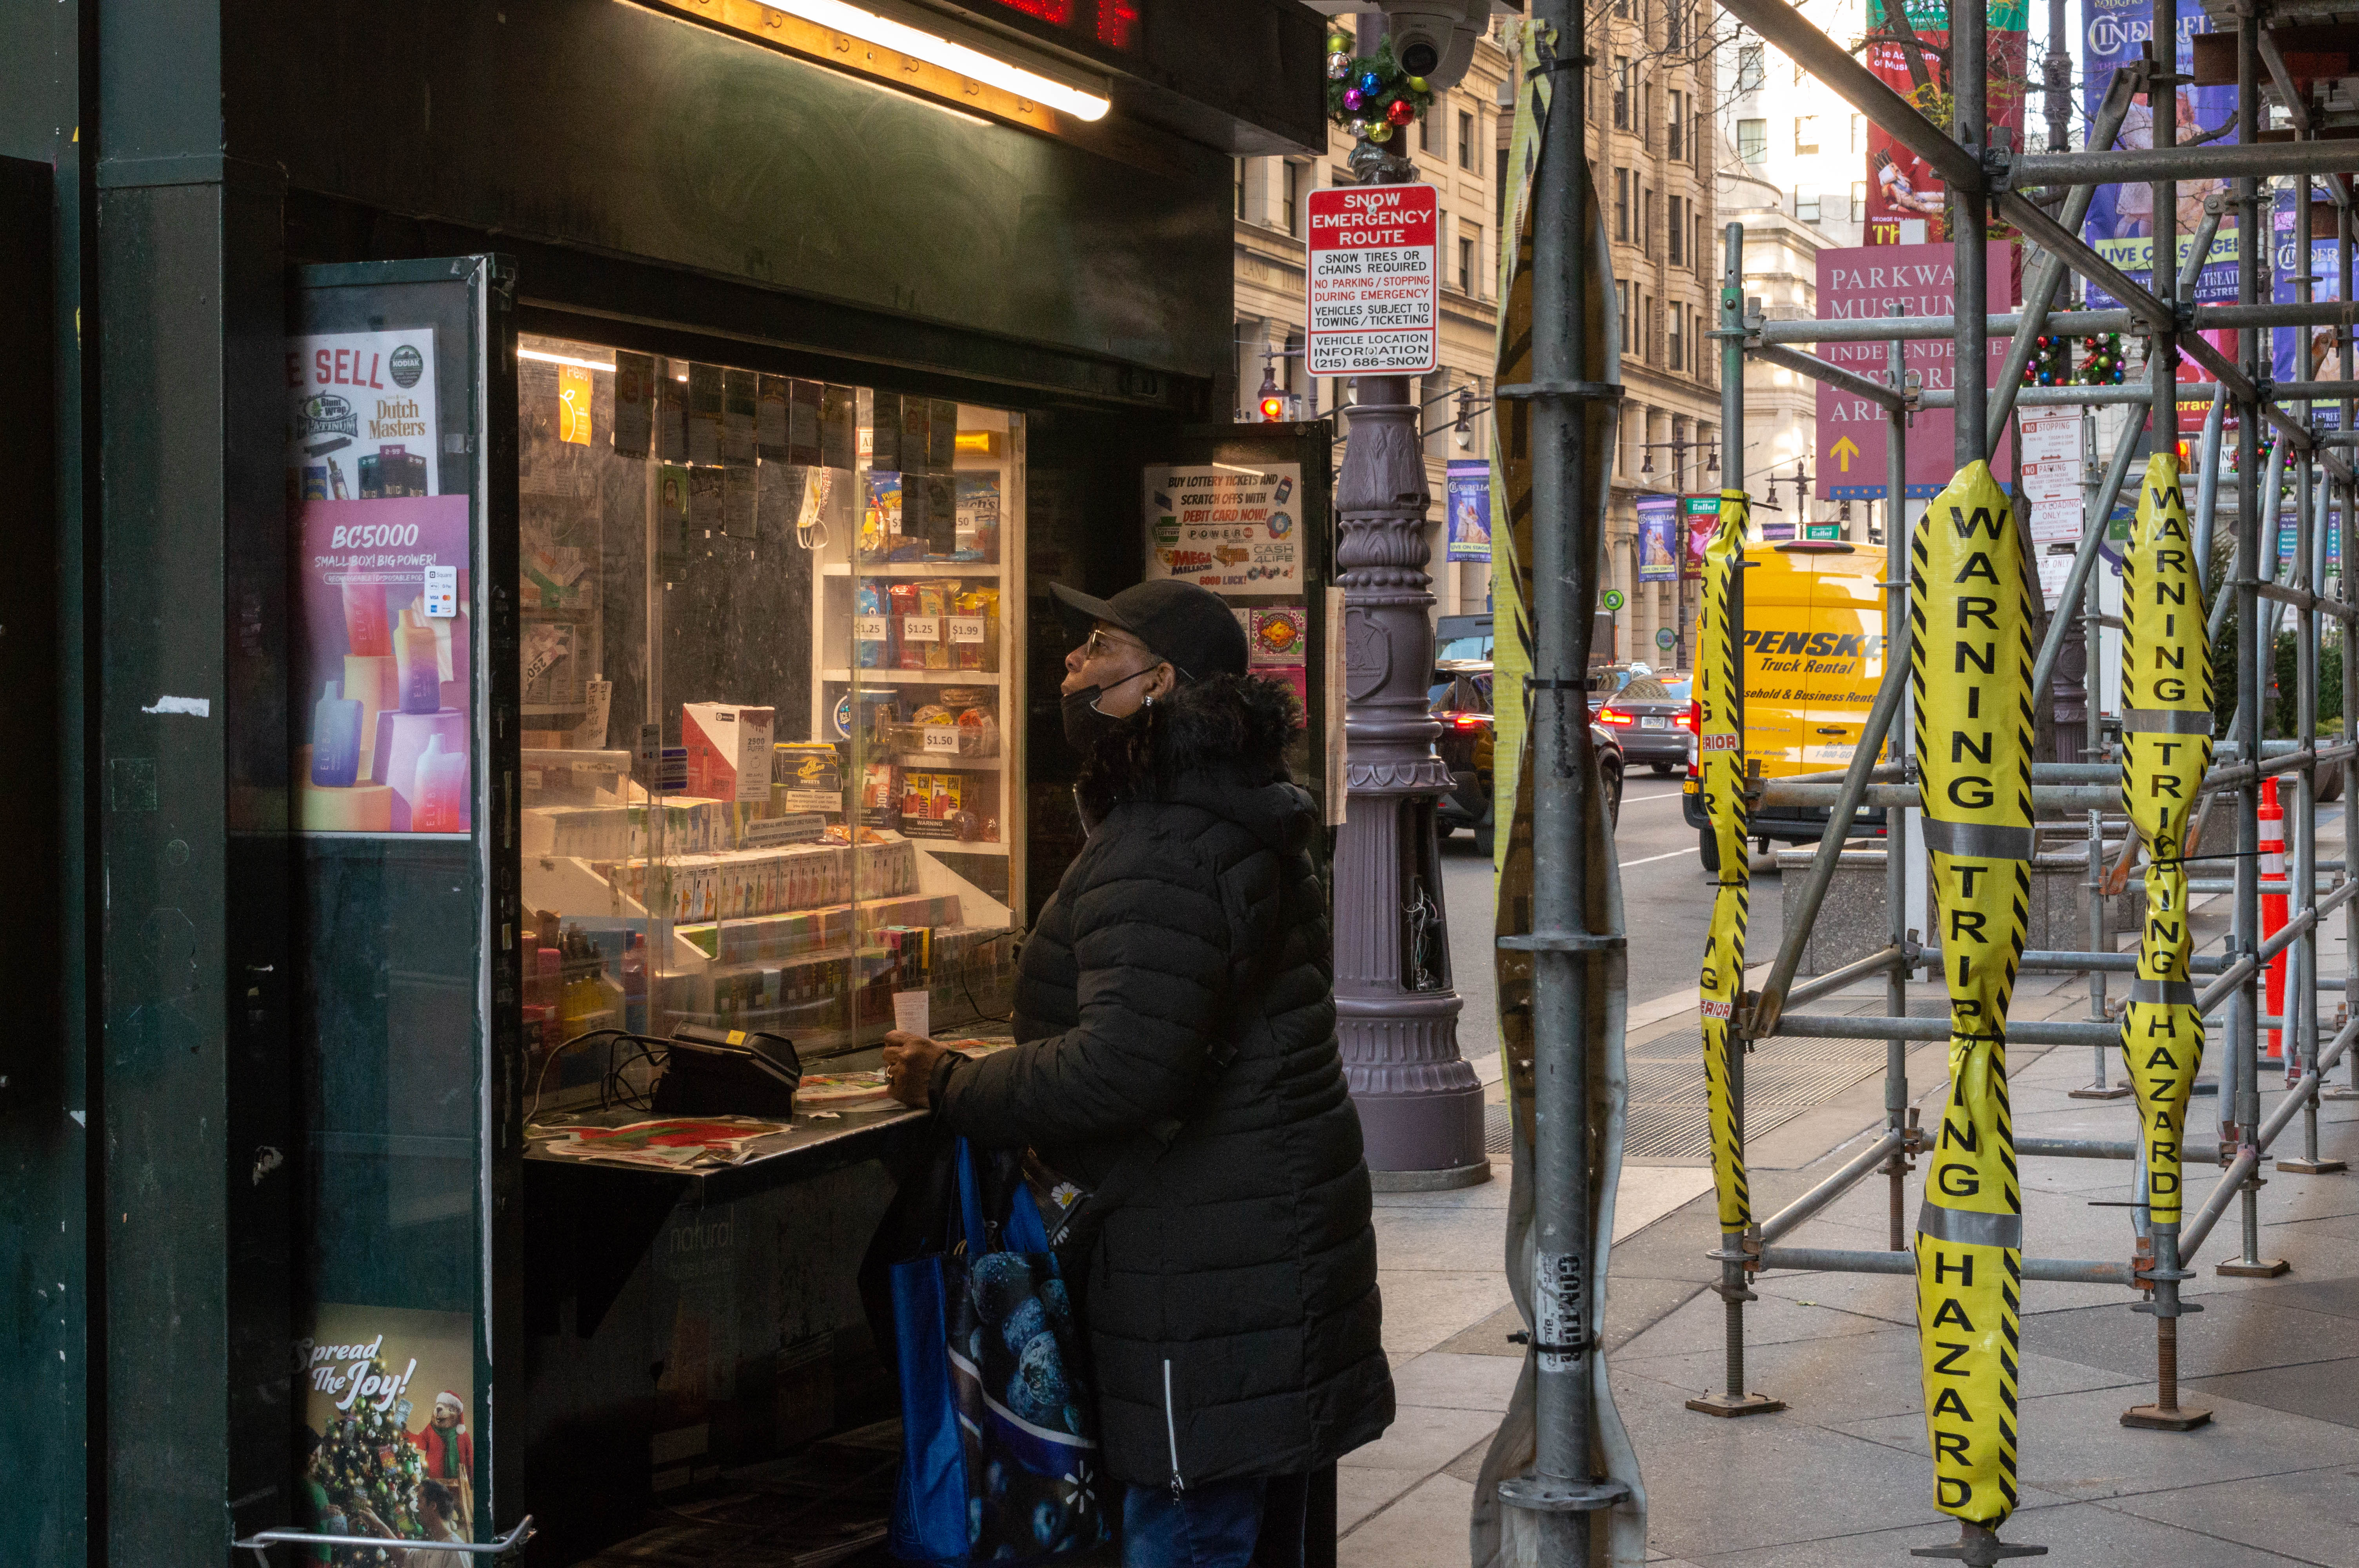 A woman stands at the counter of a newspaper stand on a city street. Surrounding the stand is scaffolding with yellow tape wrapped around its poles reading <q>Warning Tripping Hazard.<q>